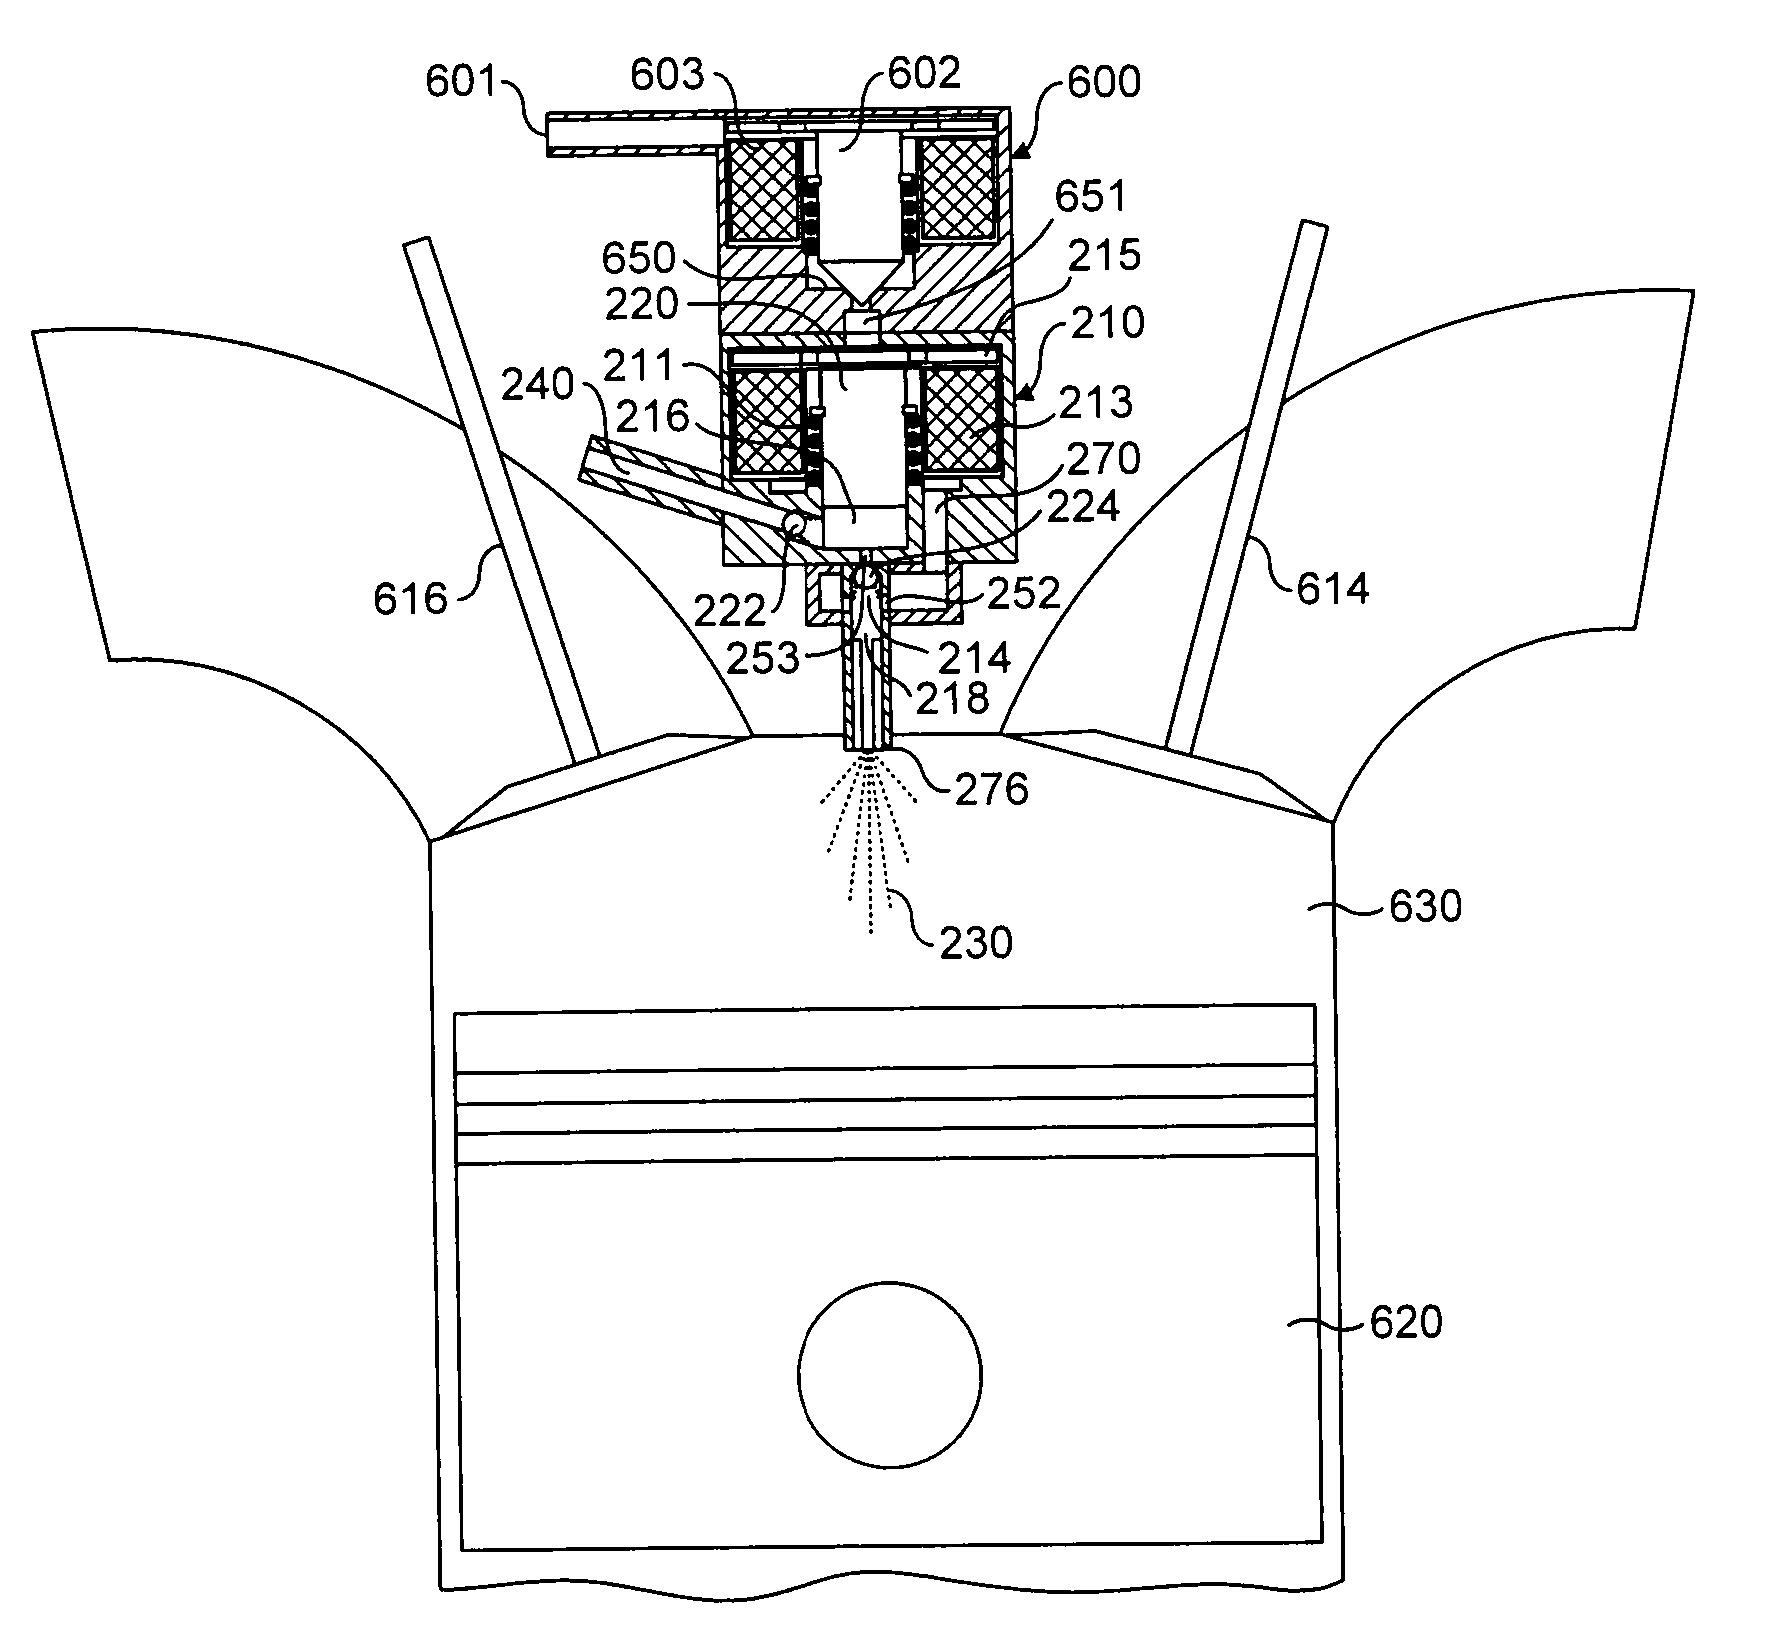 Internal combustion engine having a fuel injection system